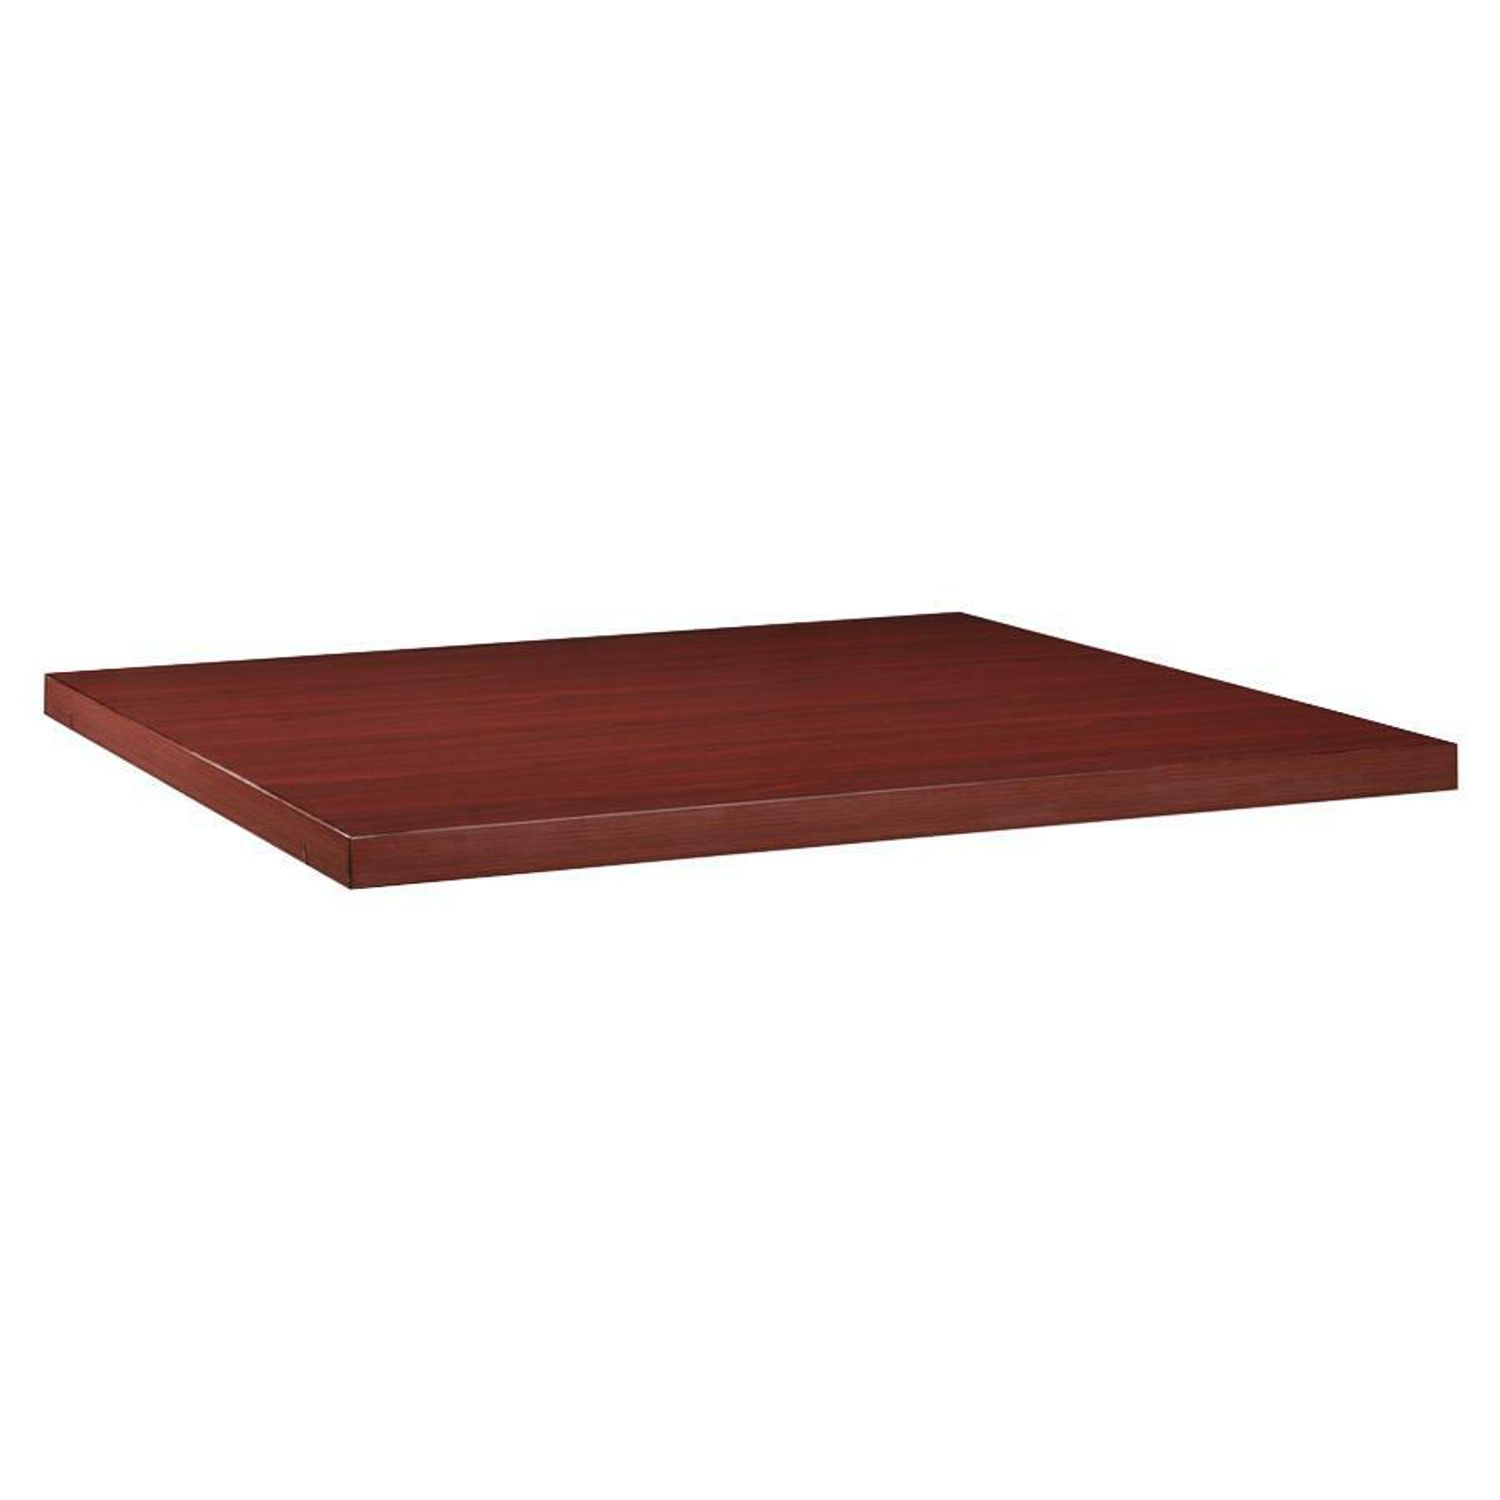 Modular Mahogany Conference Table Adder Section Square Top, 47.25" Table Top Width x 47.25" Table Top Depth x 2" Table Top Thickness, Assembly Required, Laminated, Mahogany, Melamine